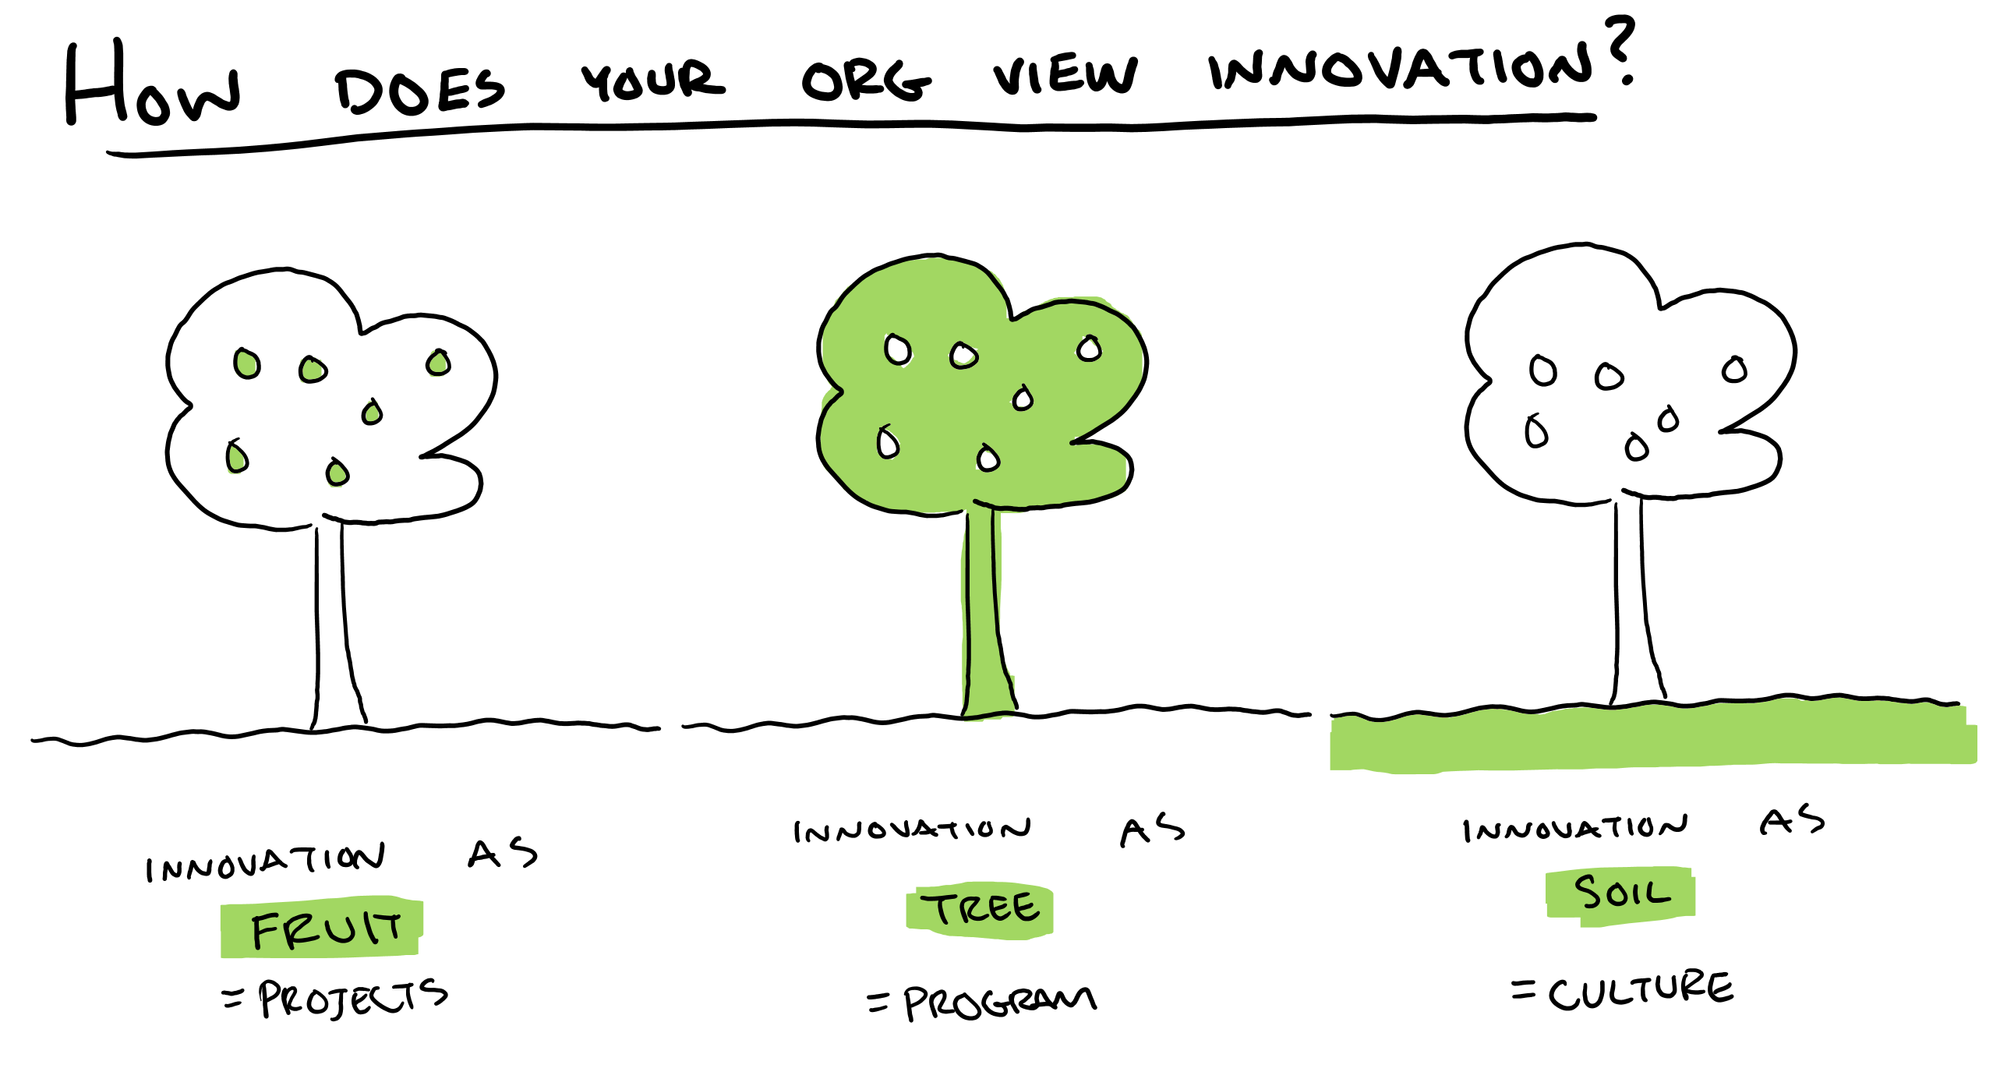 How to Unlock Your Innovation Growth with Fruits, Trees, and Soil - Ed Essey